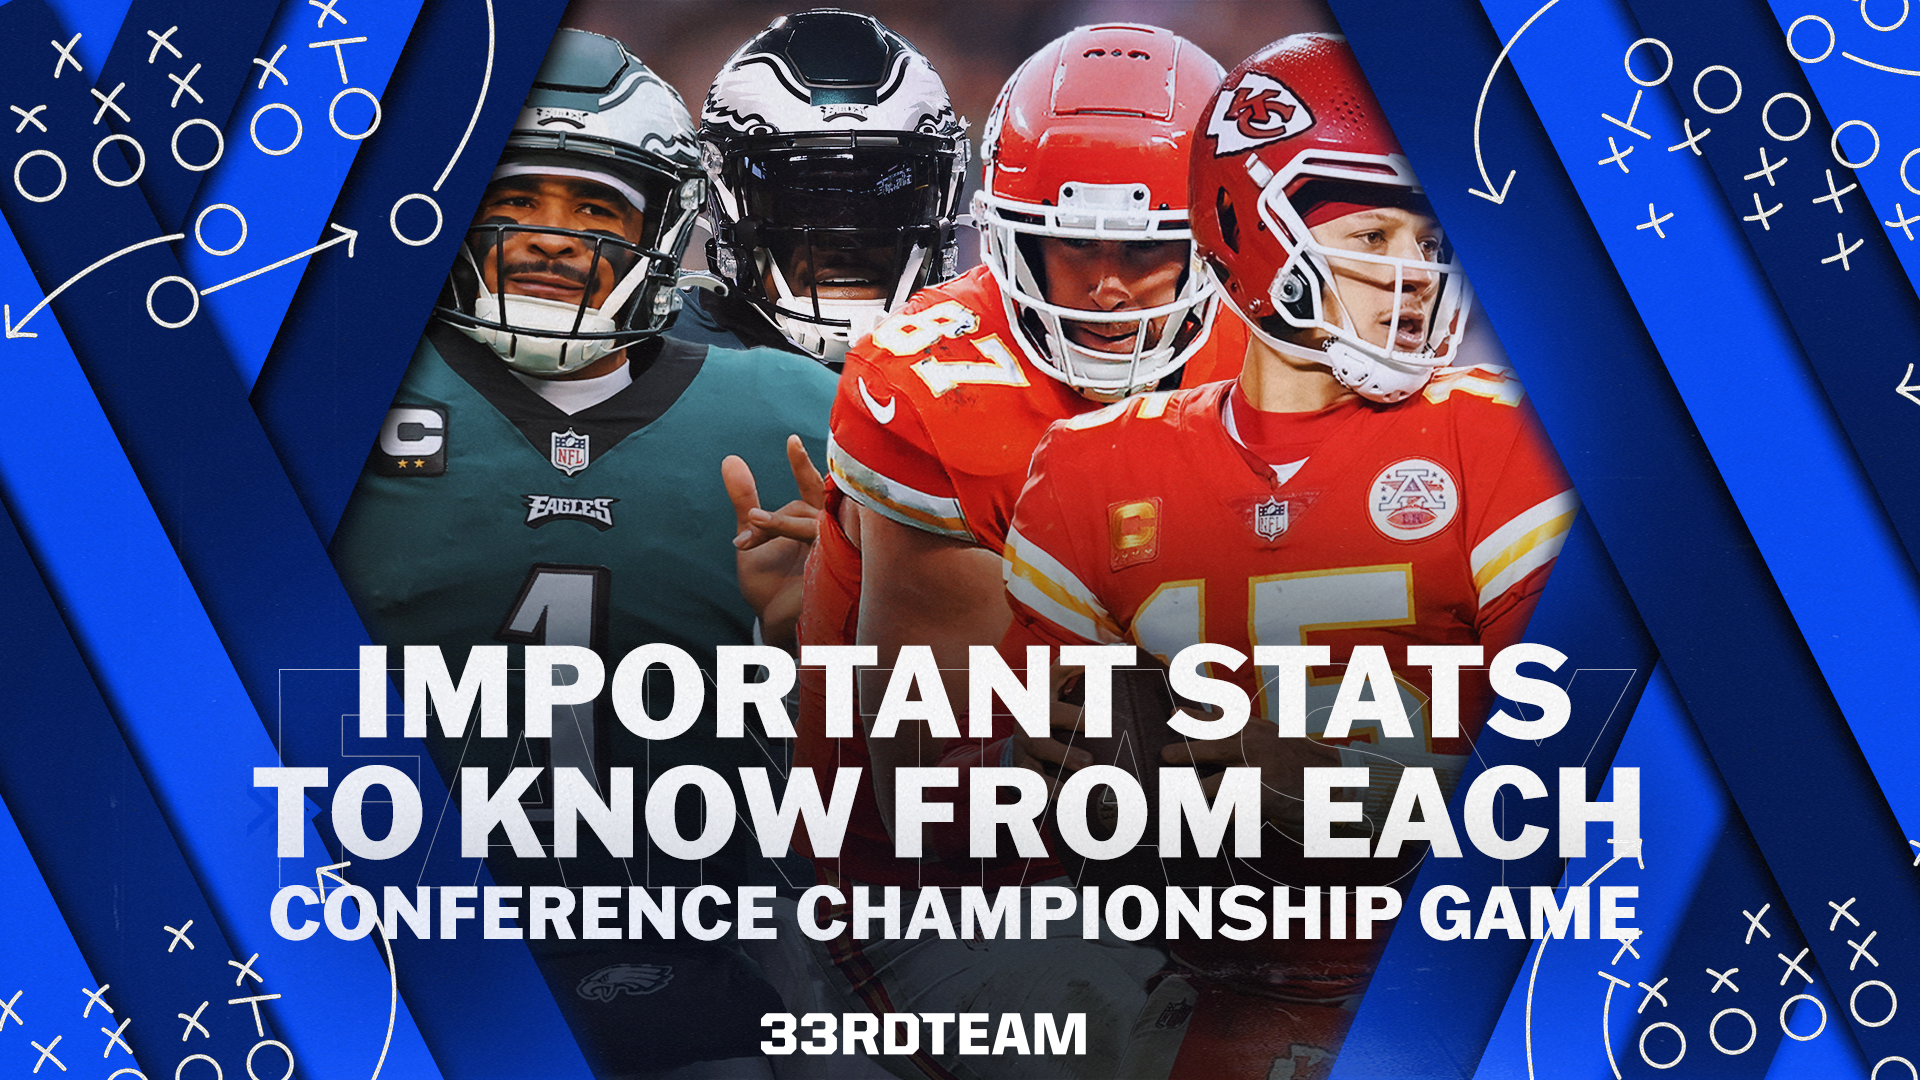 Important Championship-Week Stats for Chiefs vs. Eagles Super Bowl Matchup